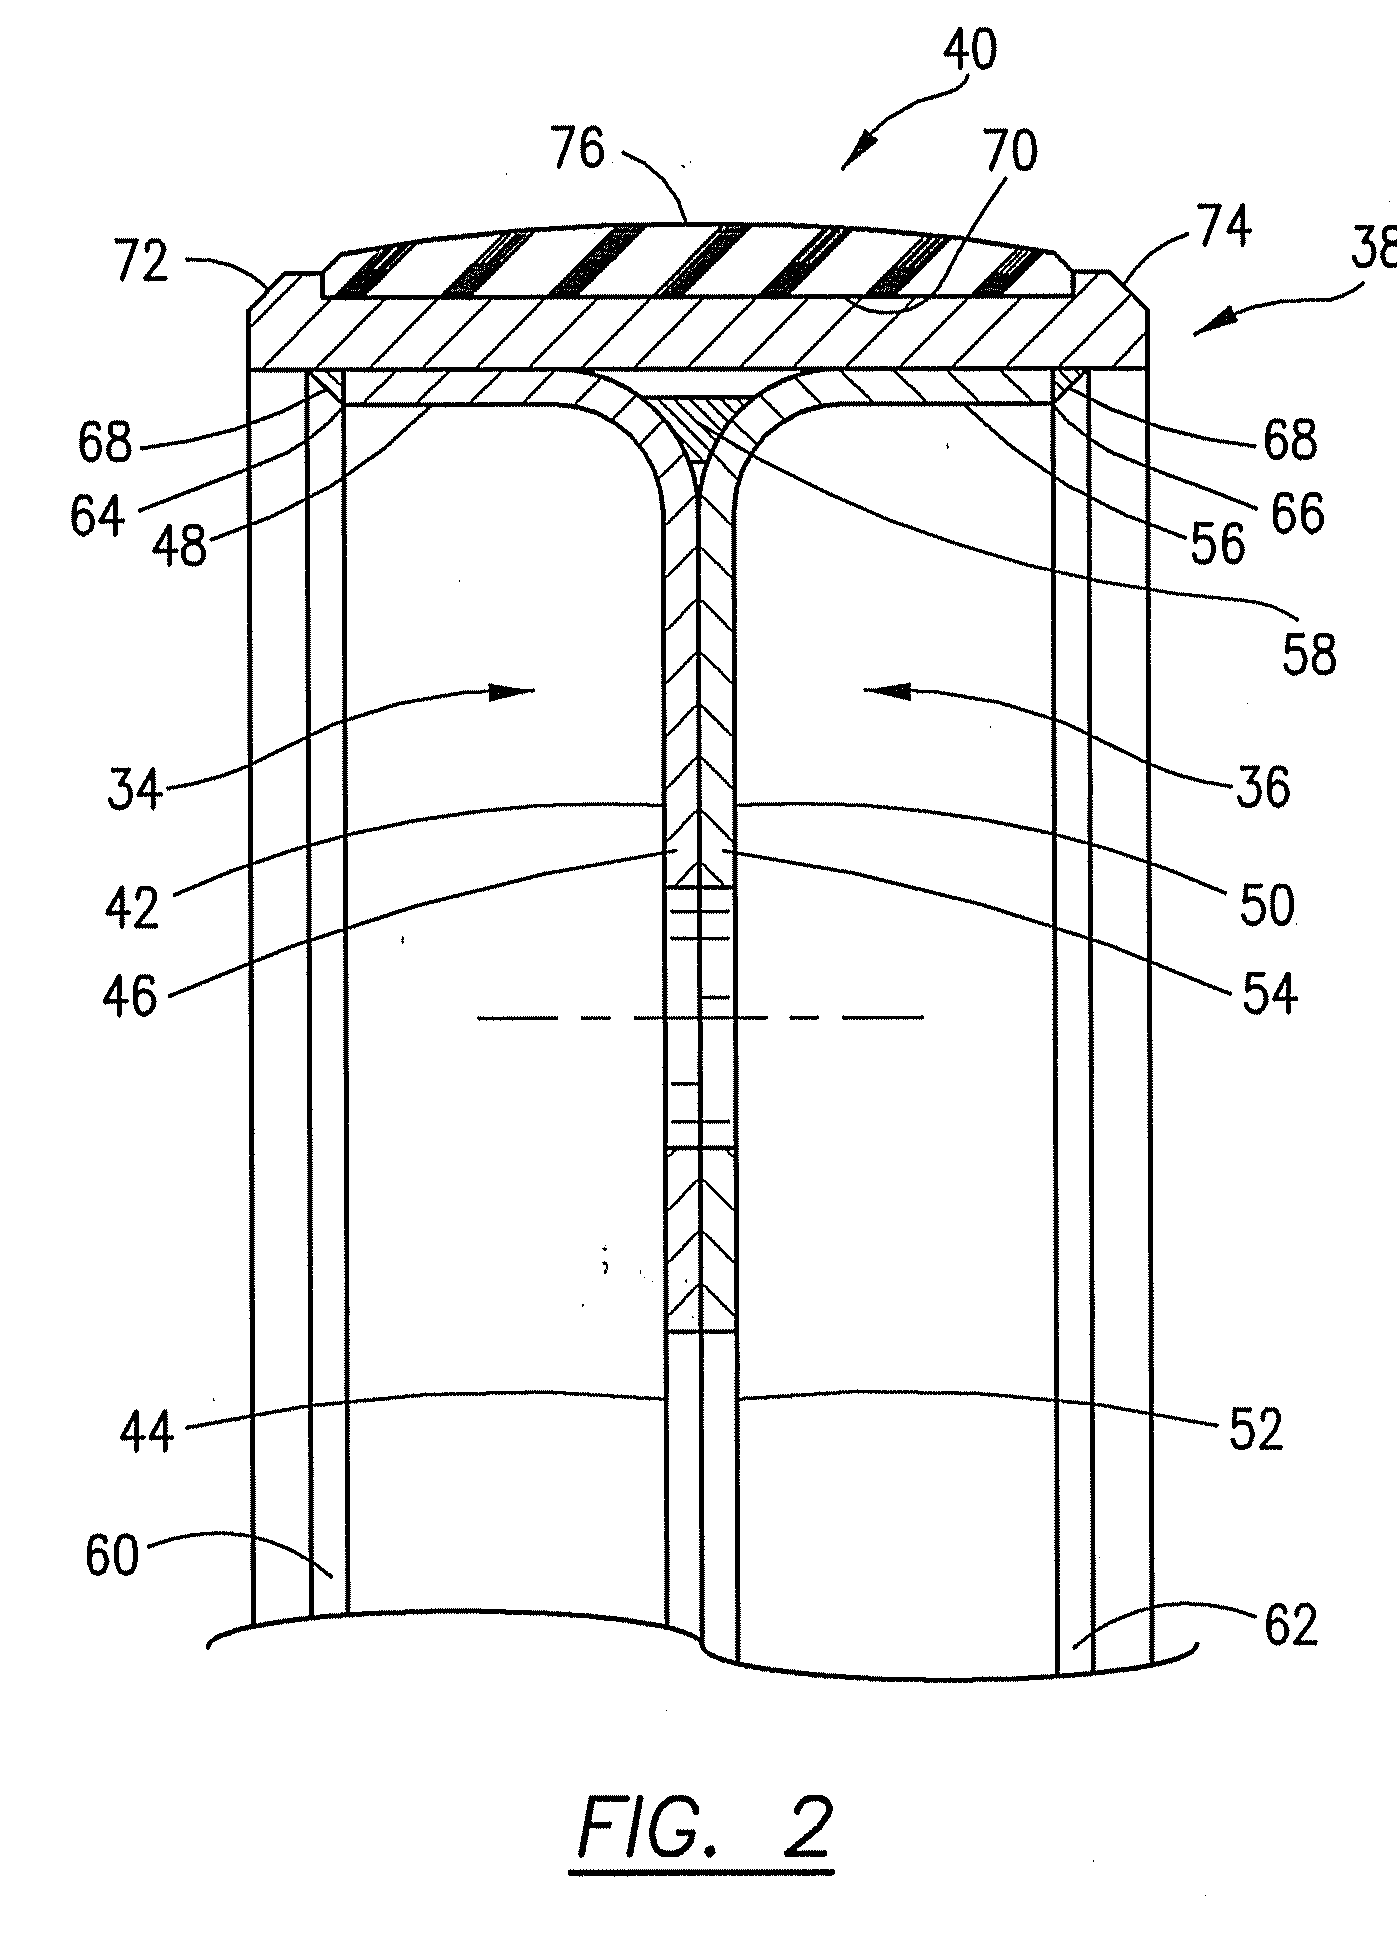 Method and apparatus for transporting construction equipment in an enclosed container within the hold of a vessel